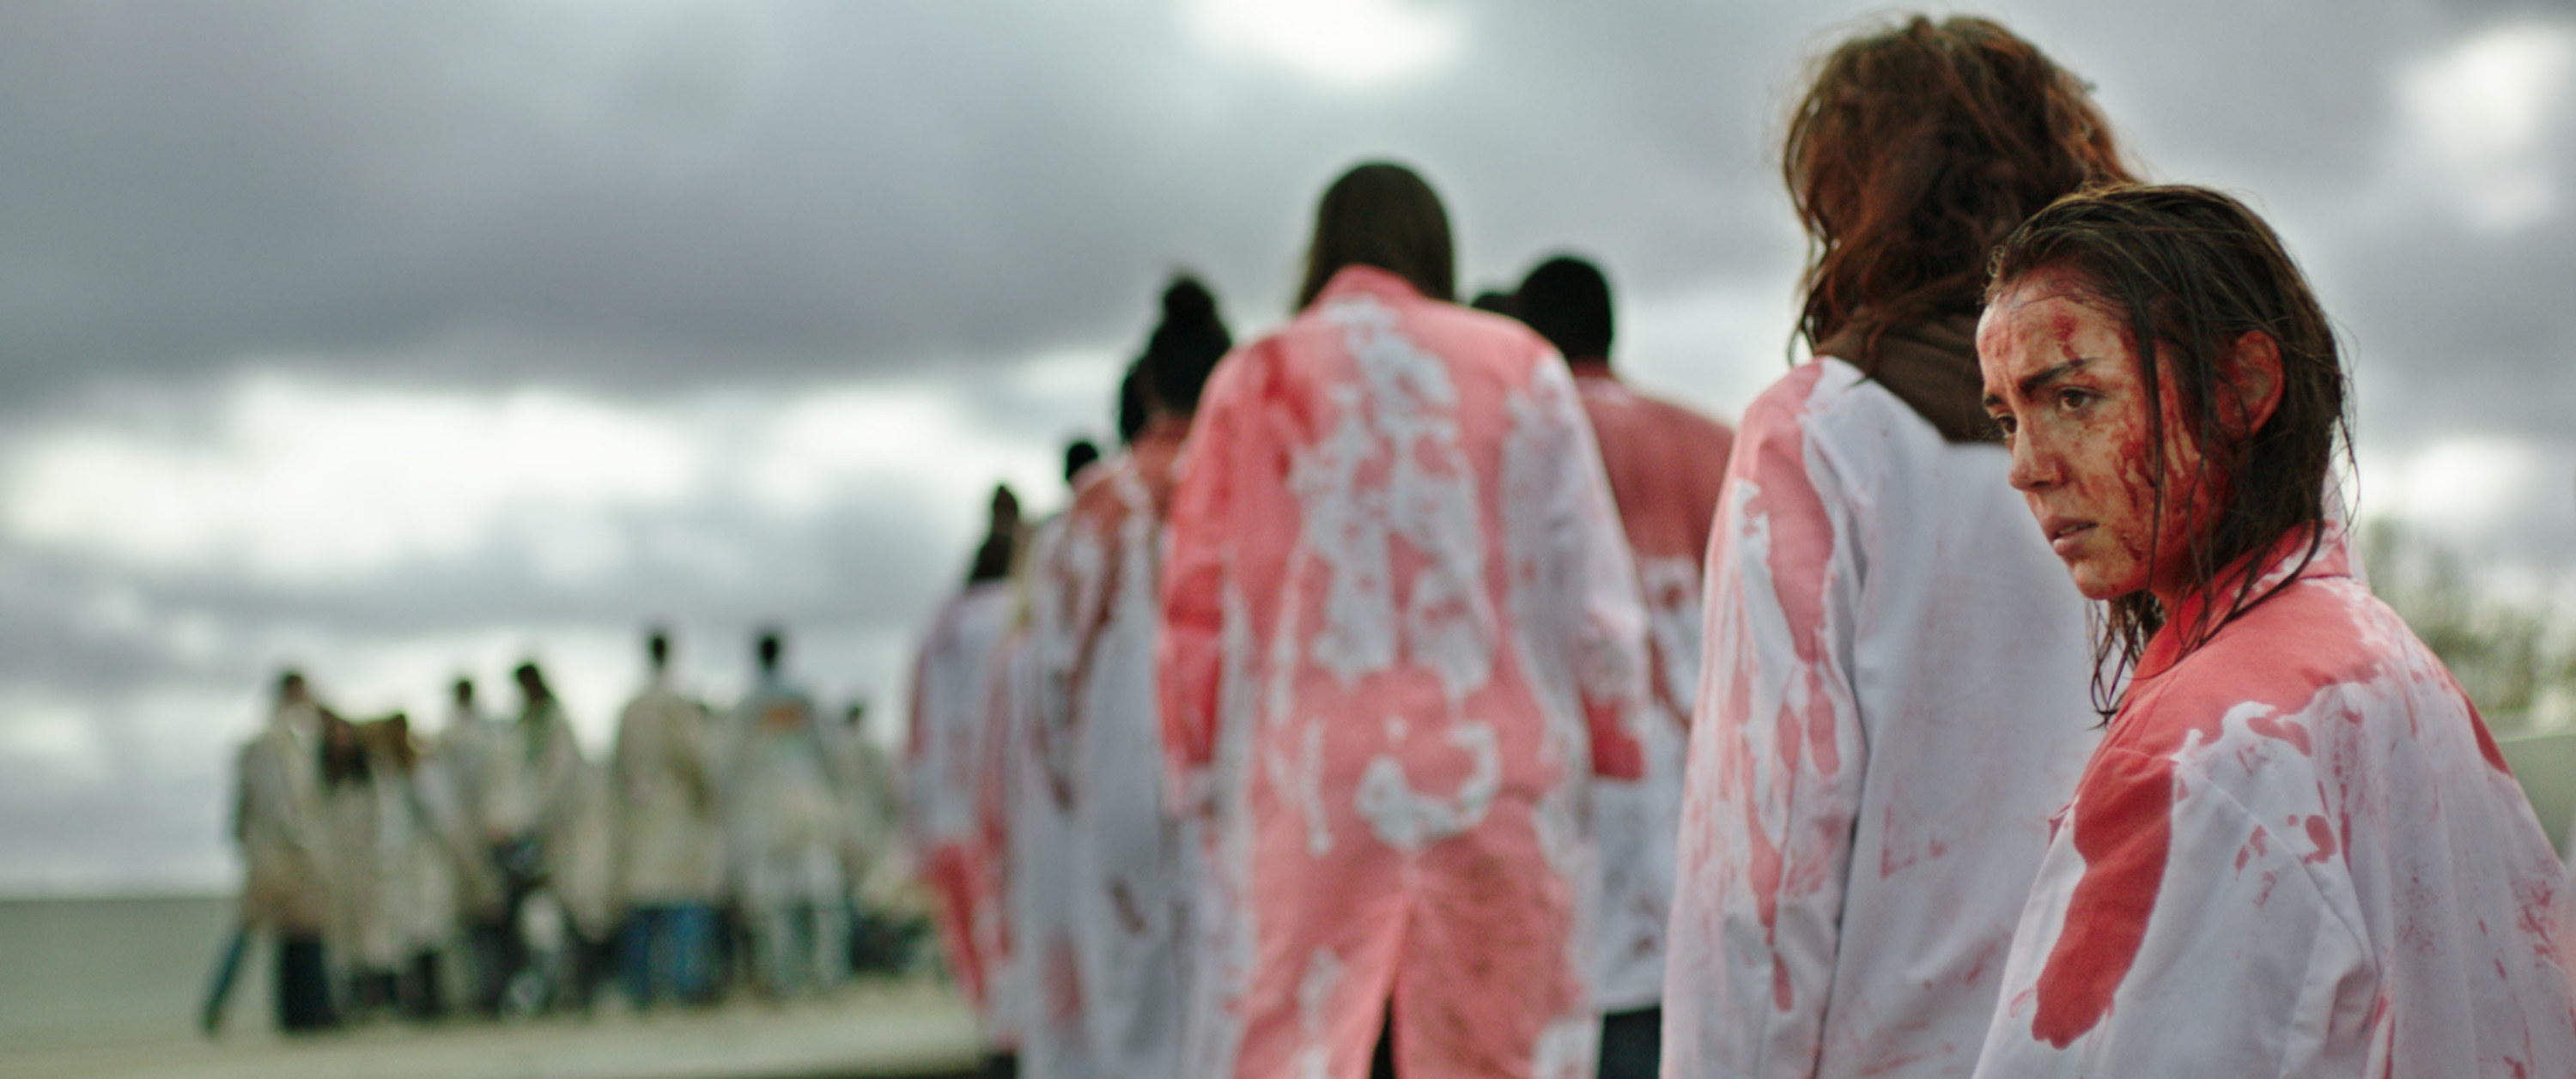 A line of people with bloodied white coats and faces